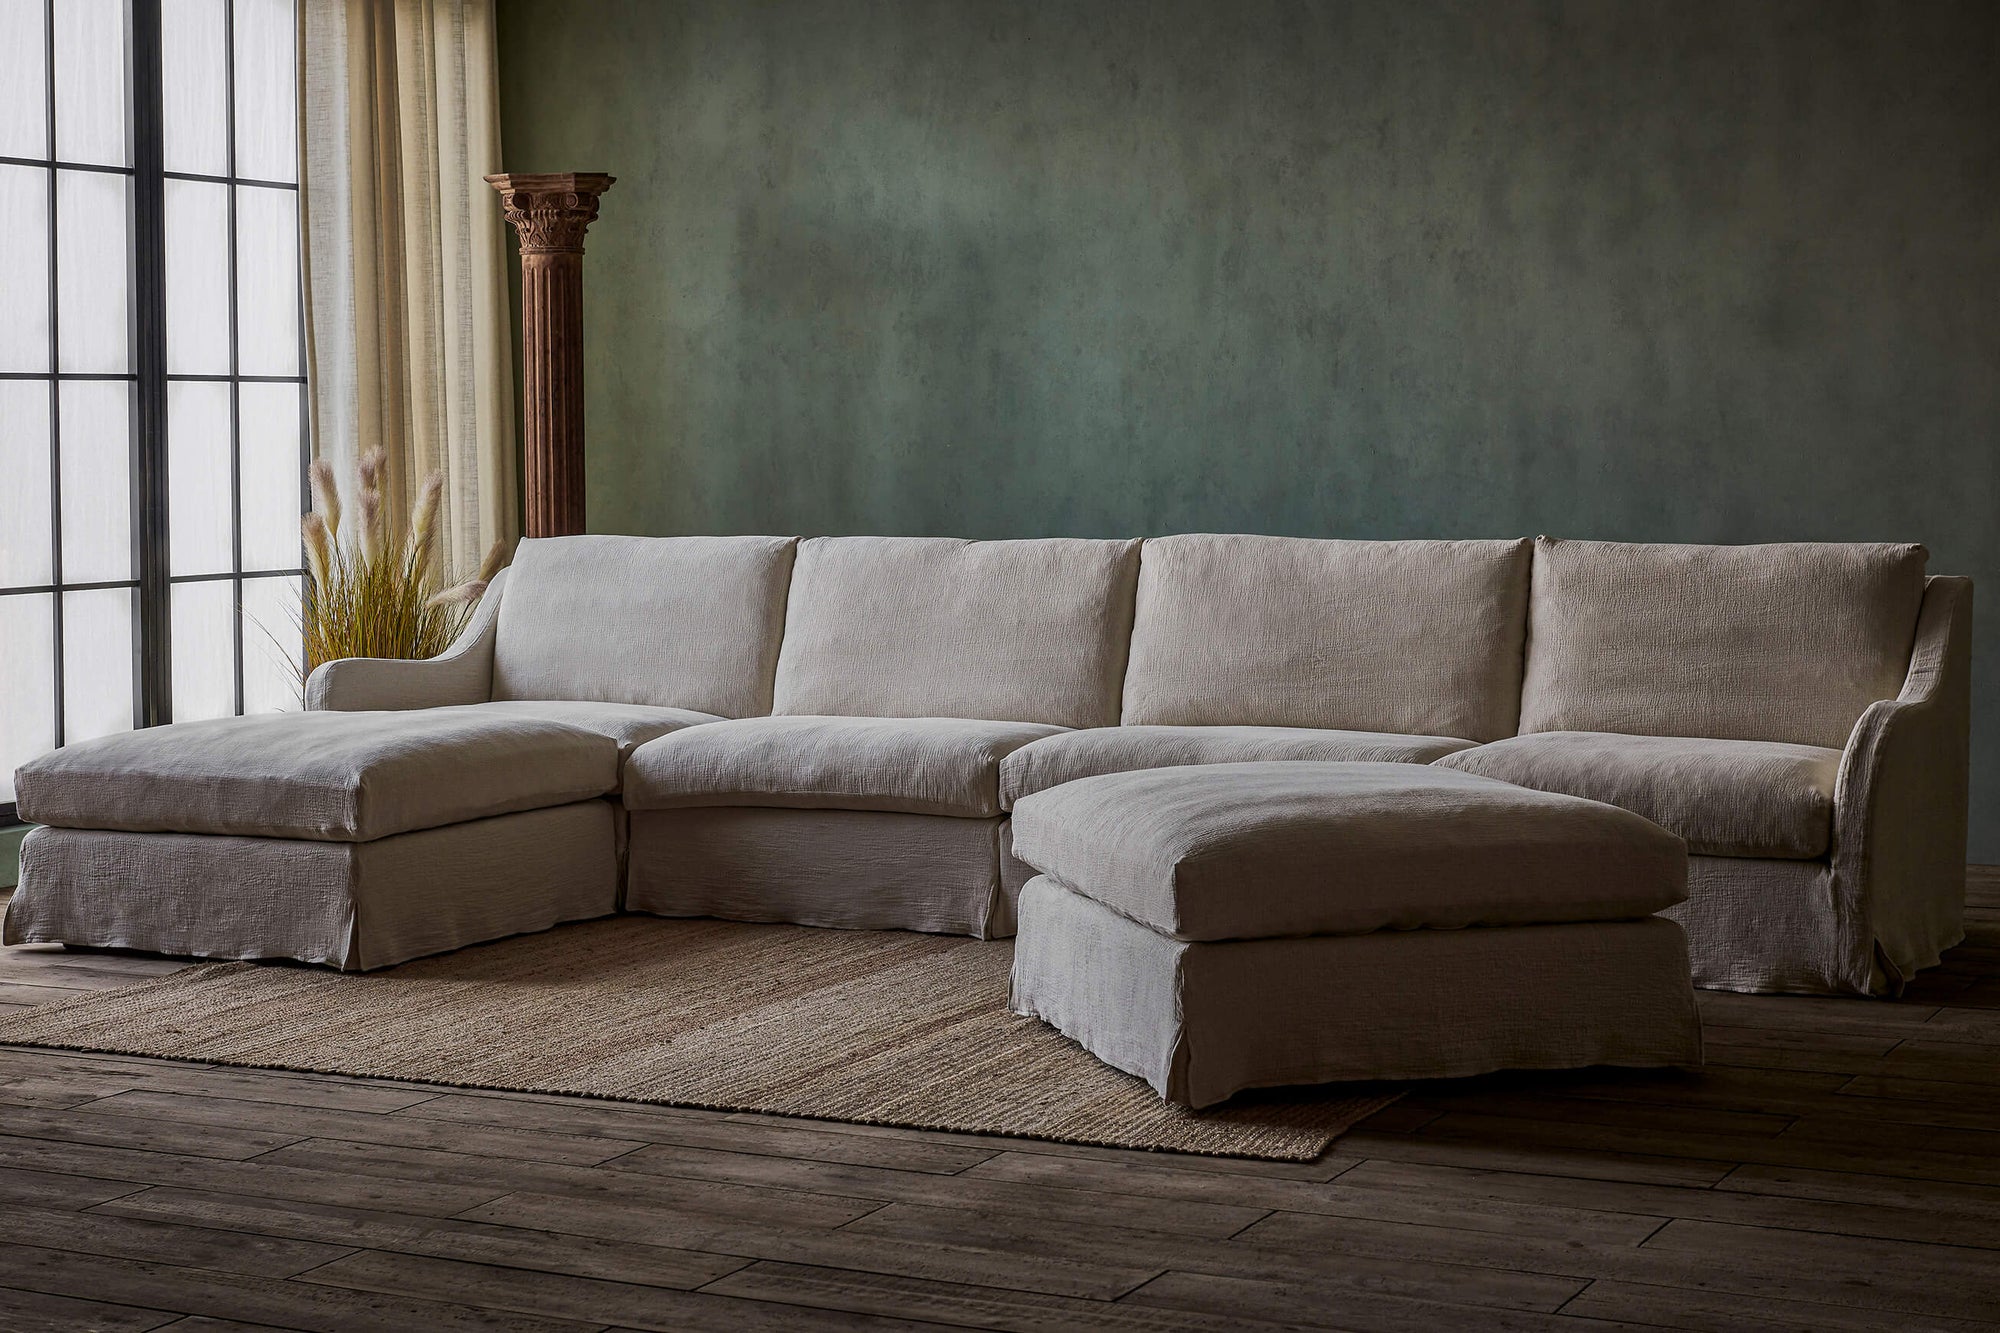 Esmé Sectional Ottoman in Corn Silk, a light beige Washed Cotton Linen, styled in a room with the Esmé Sectional Sofa placed next to a window